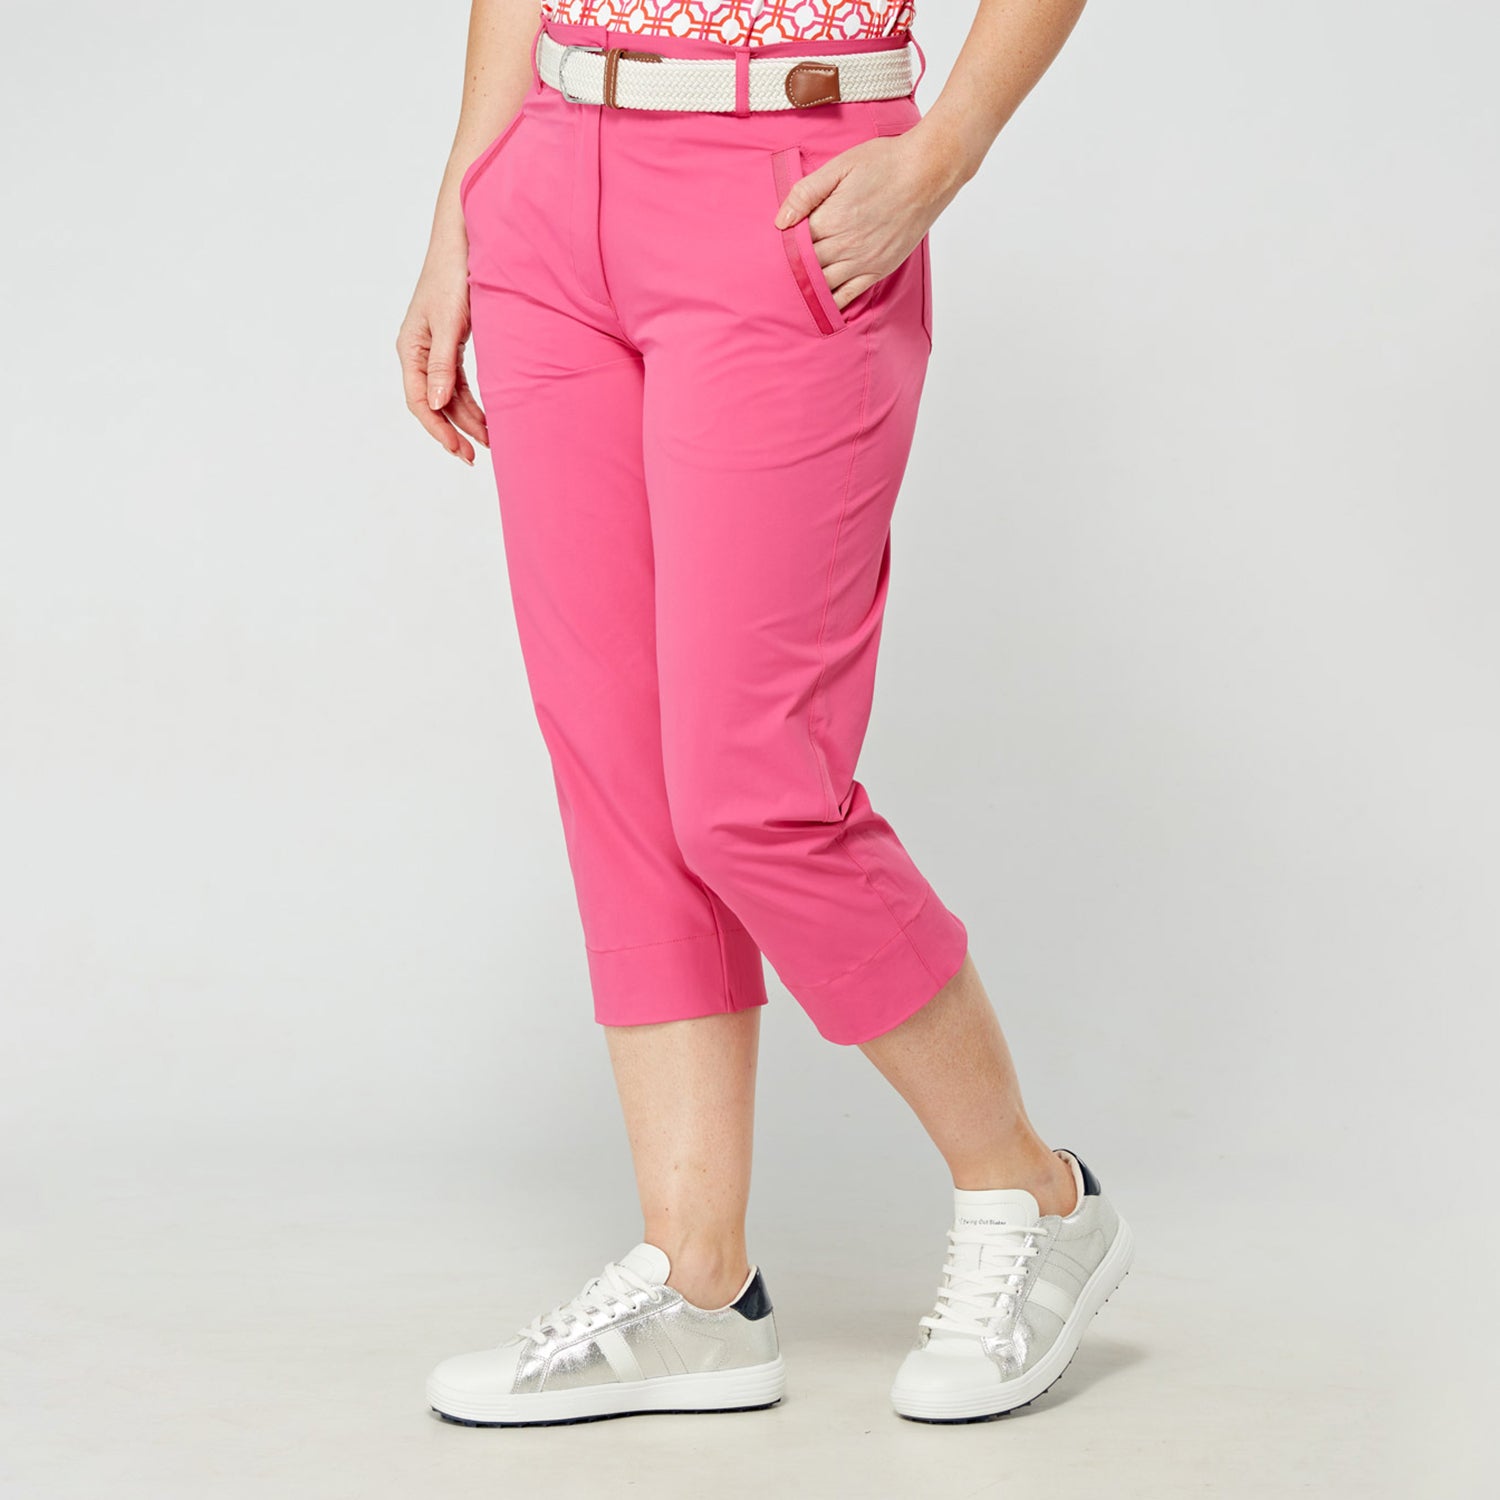 Swing Out Sister Ladies Lush Pink Dri-Fit Soft-Stretch Capris